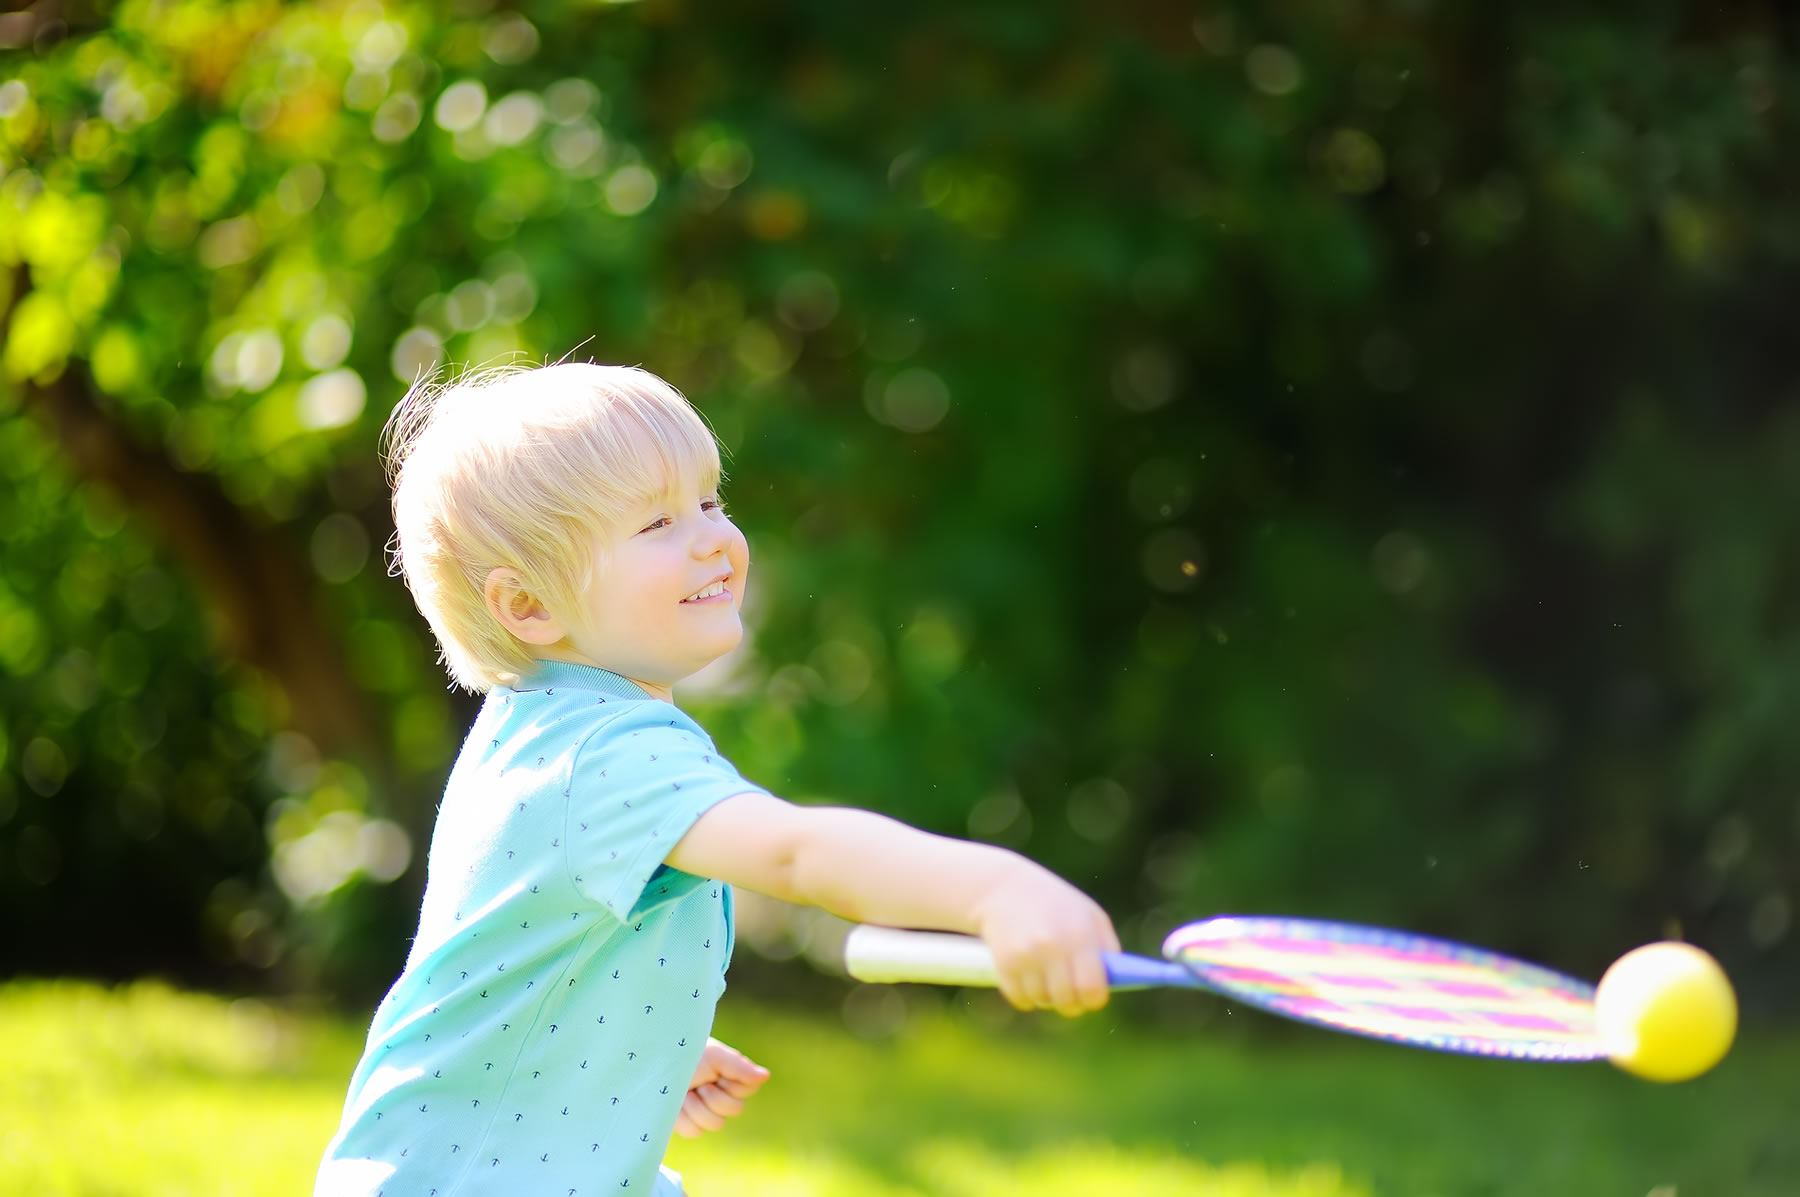 Tennis lessons in Weybridge for children 4 years and older